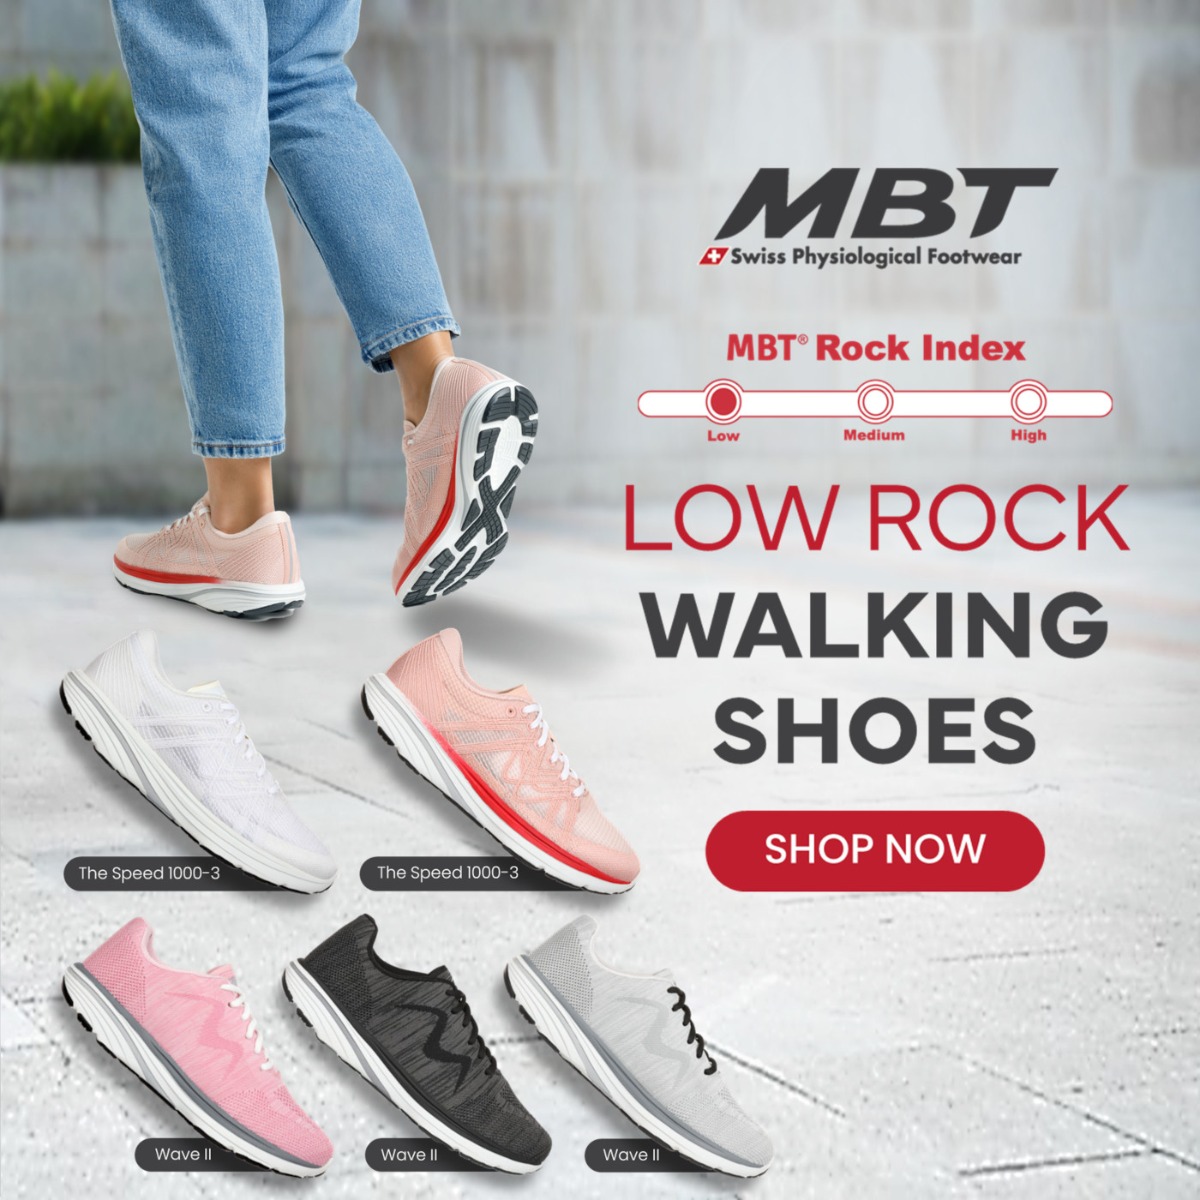 MBT USA Official Store | Official® Site for MBT Shoes in the US and Canada  :: US.MBT.com | Online Shoes Shopping